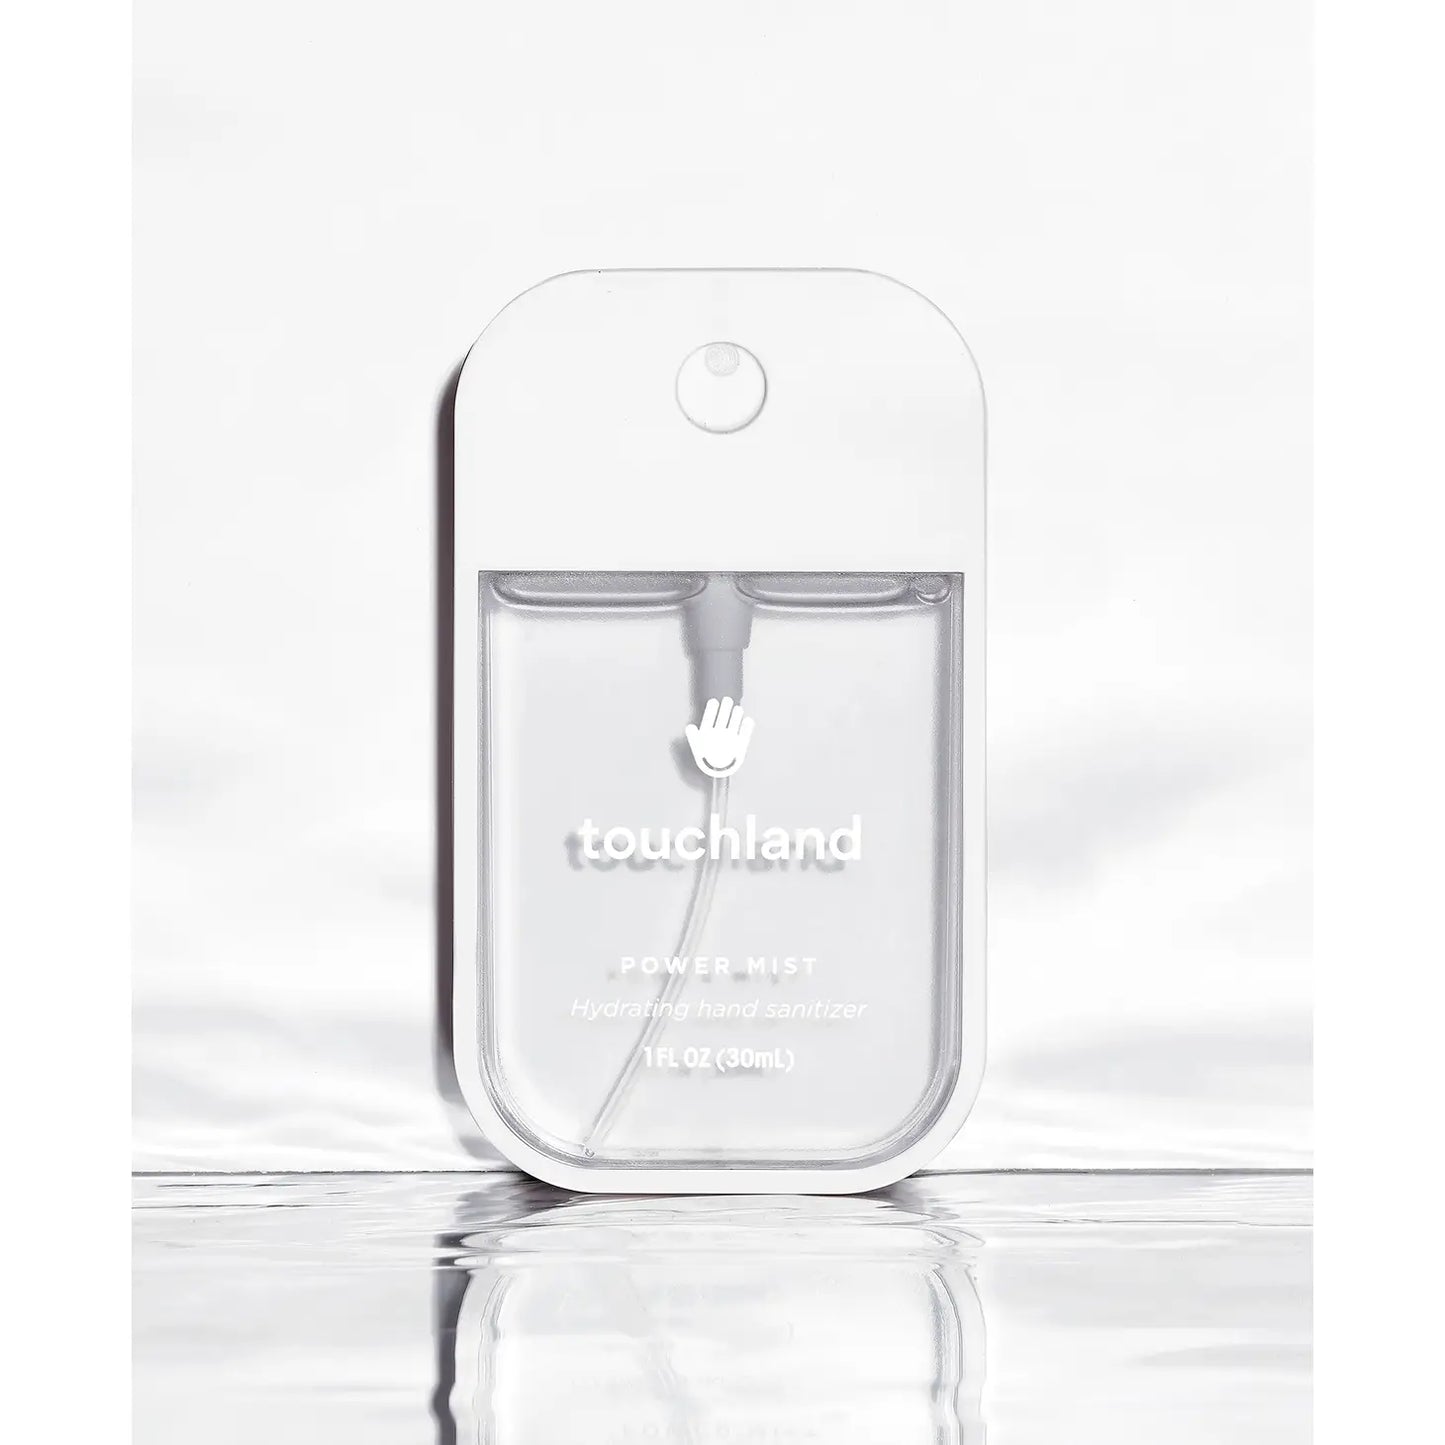 Unscented • Touchland Hand Sanitizer – Calligraphy Creations In KY